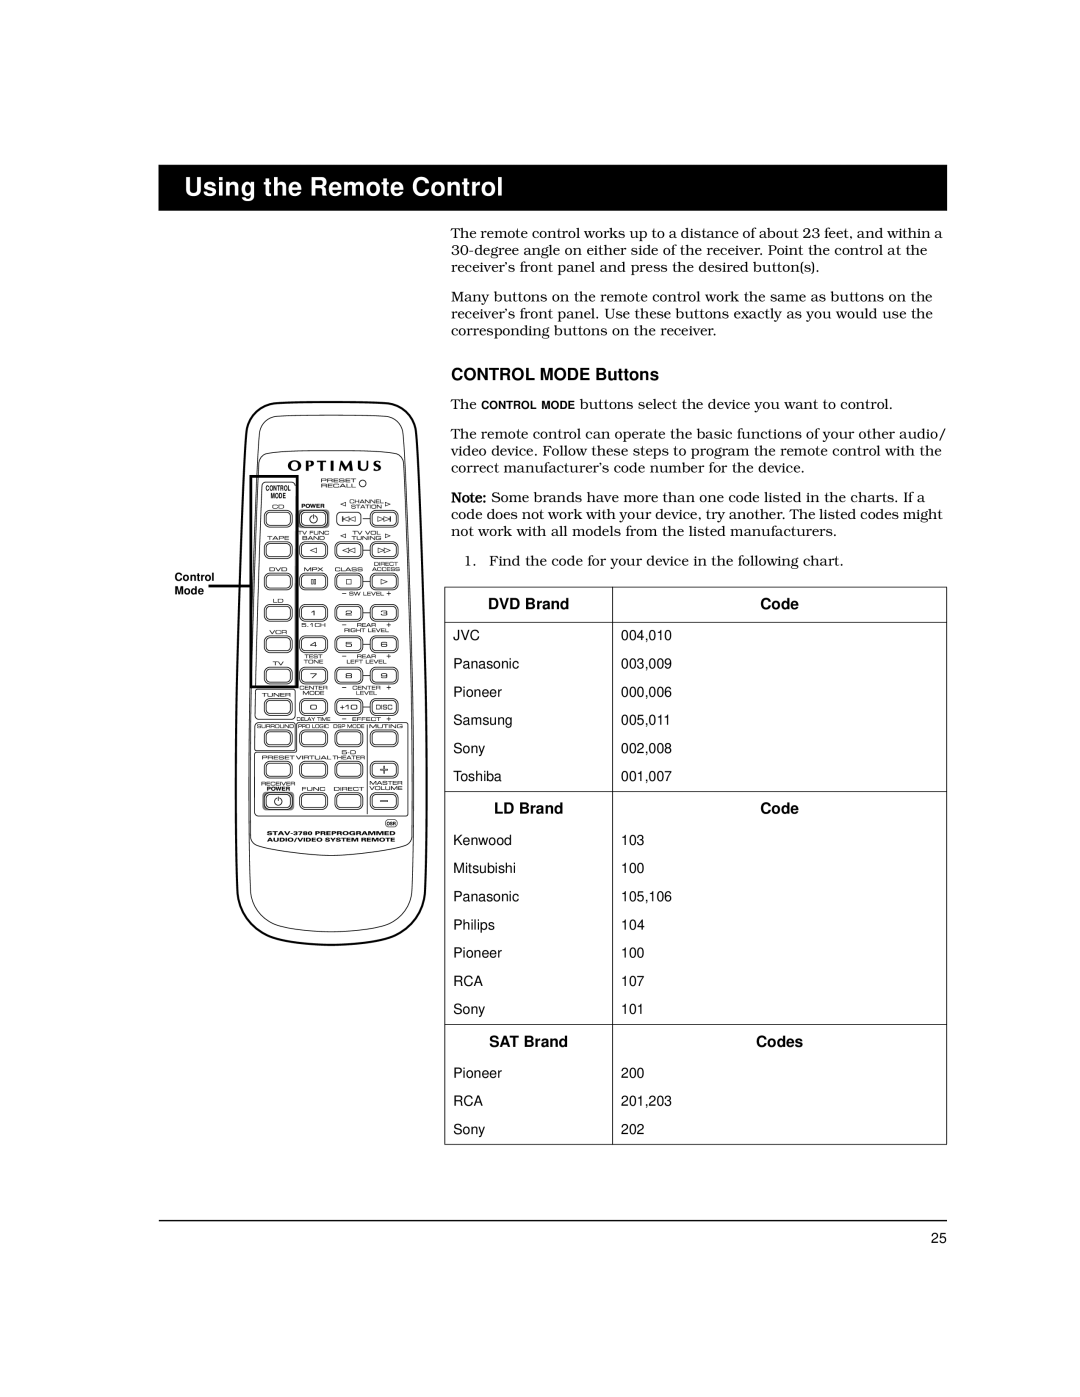 Optimus STAV-3780 owner manual Using the Remote Control, Control Mode Buttons 